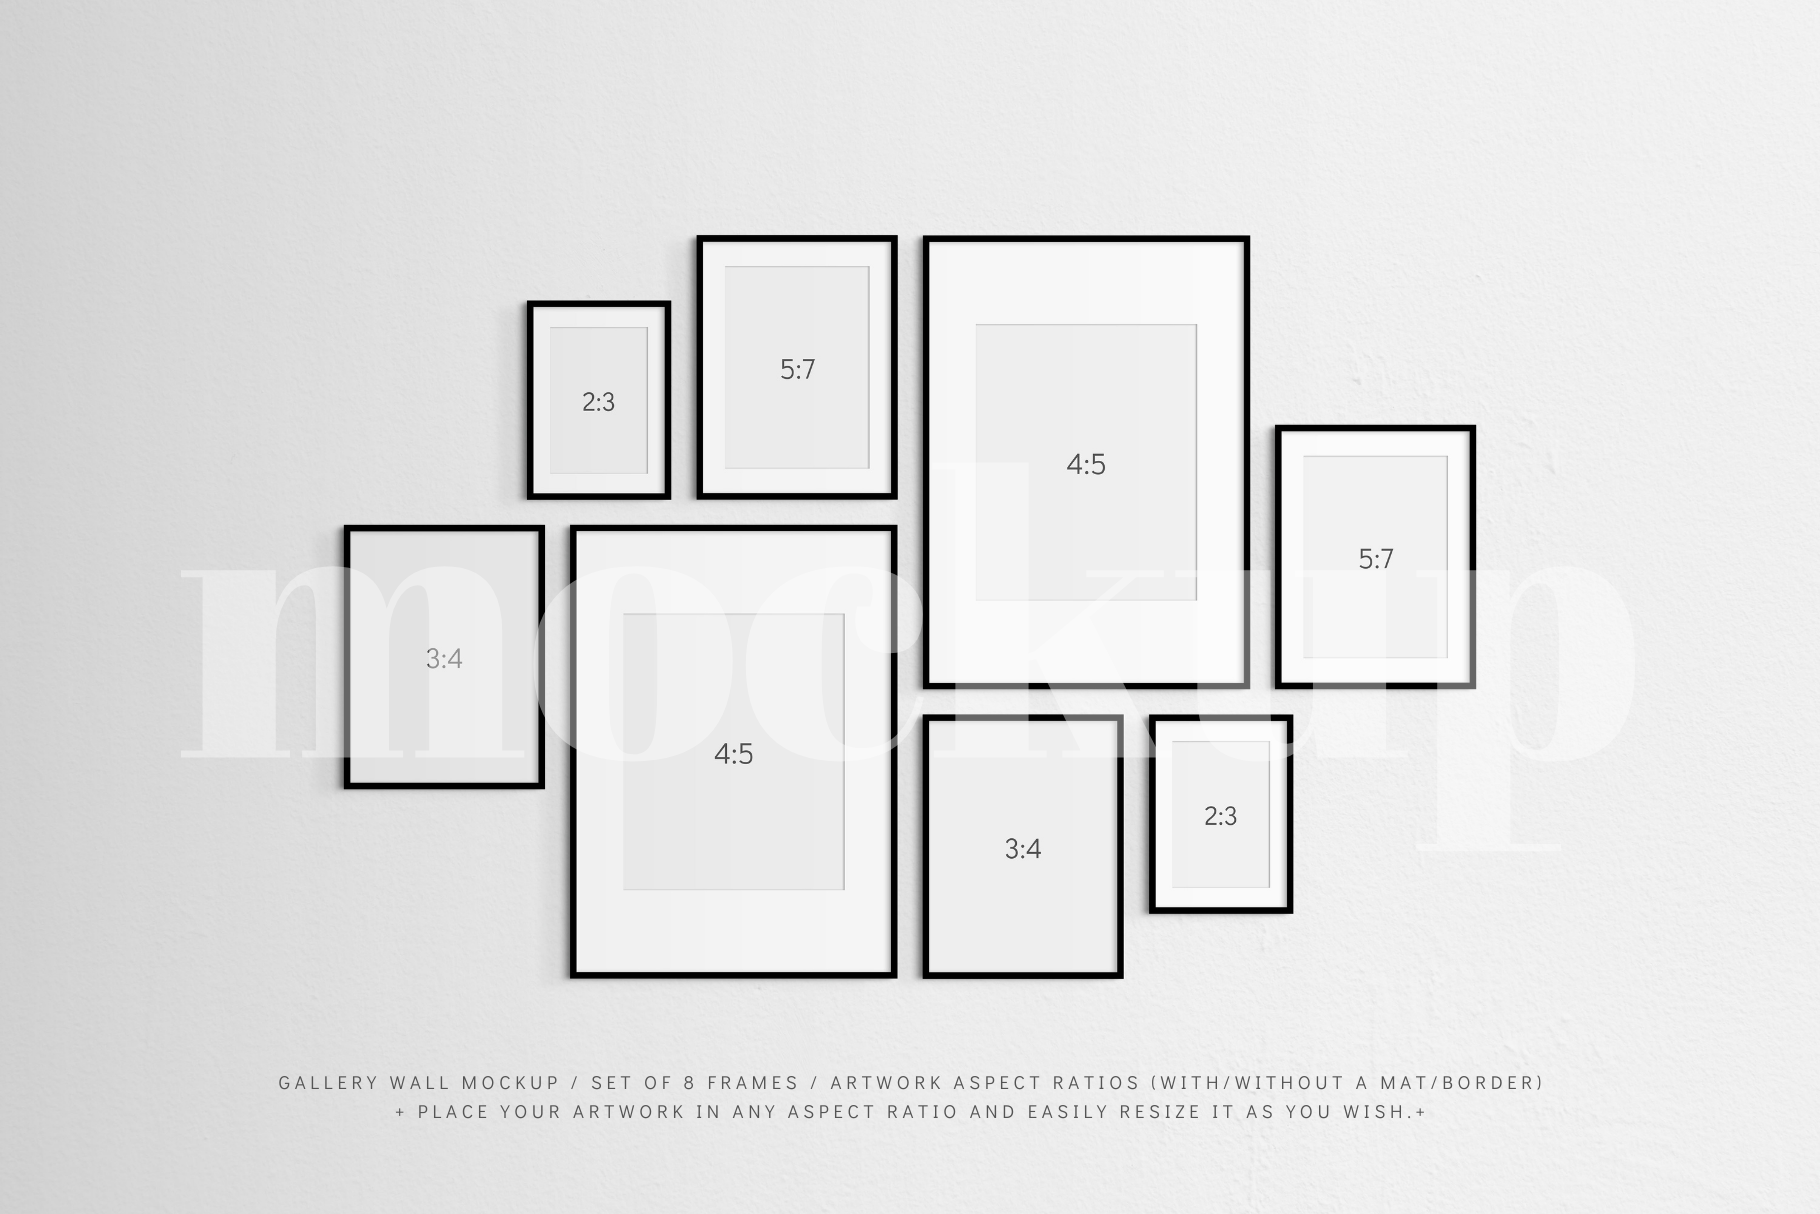 Gallery wall frame mockup that features a set of 8 thin black frames with or without a white mat (passe-partout) border..